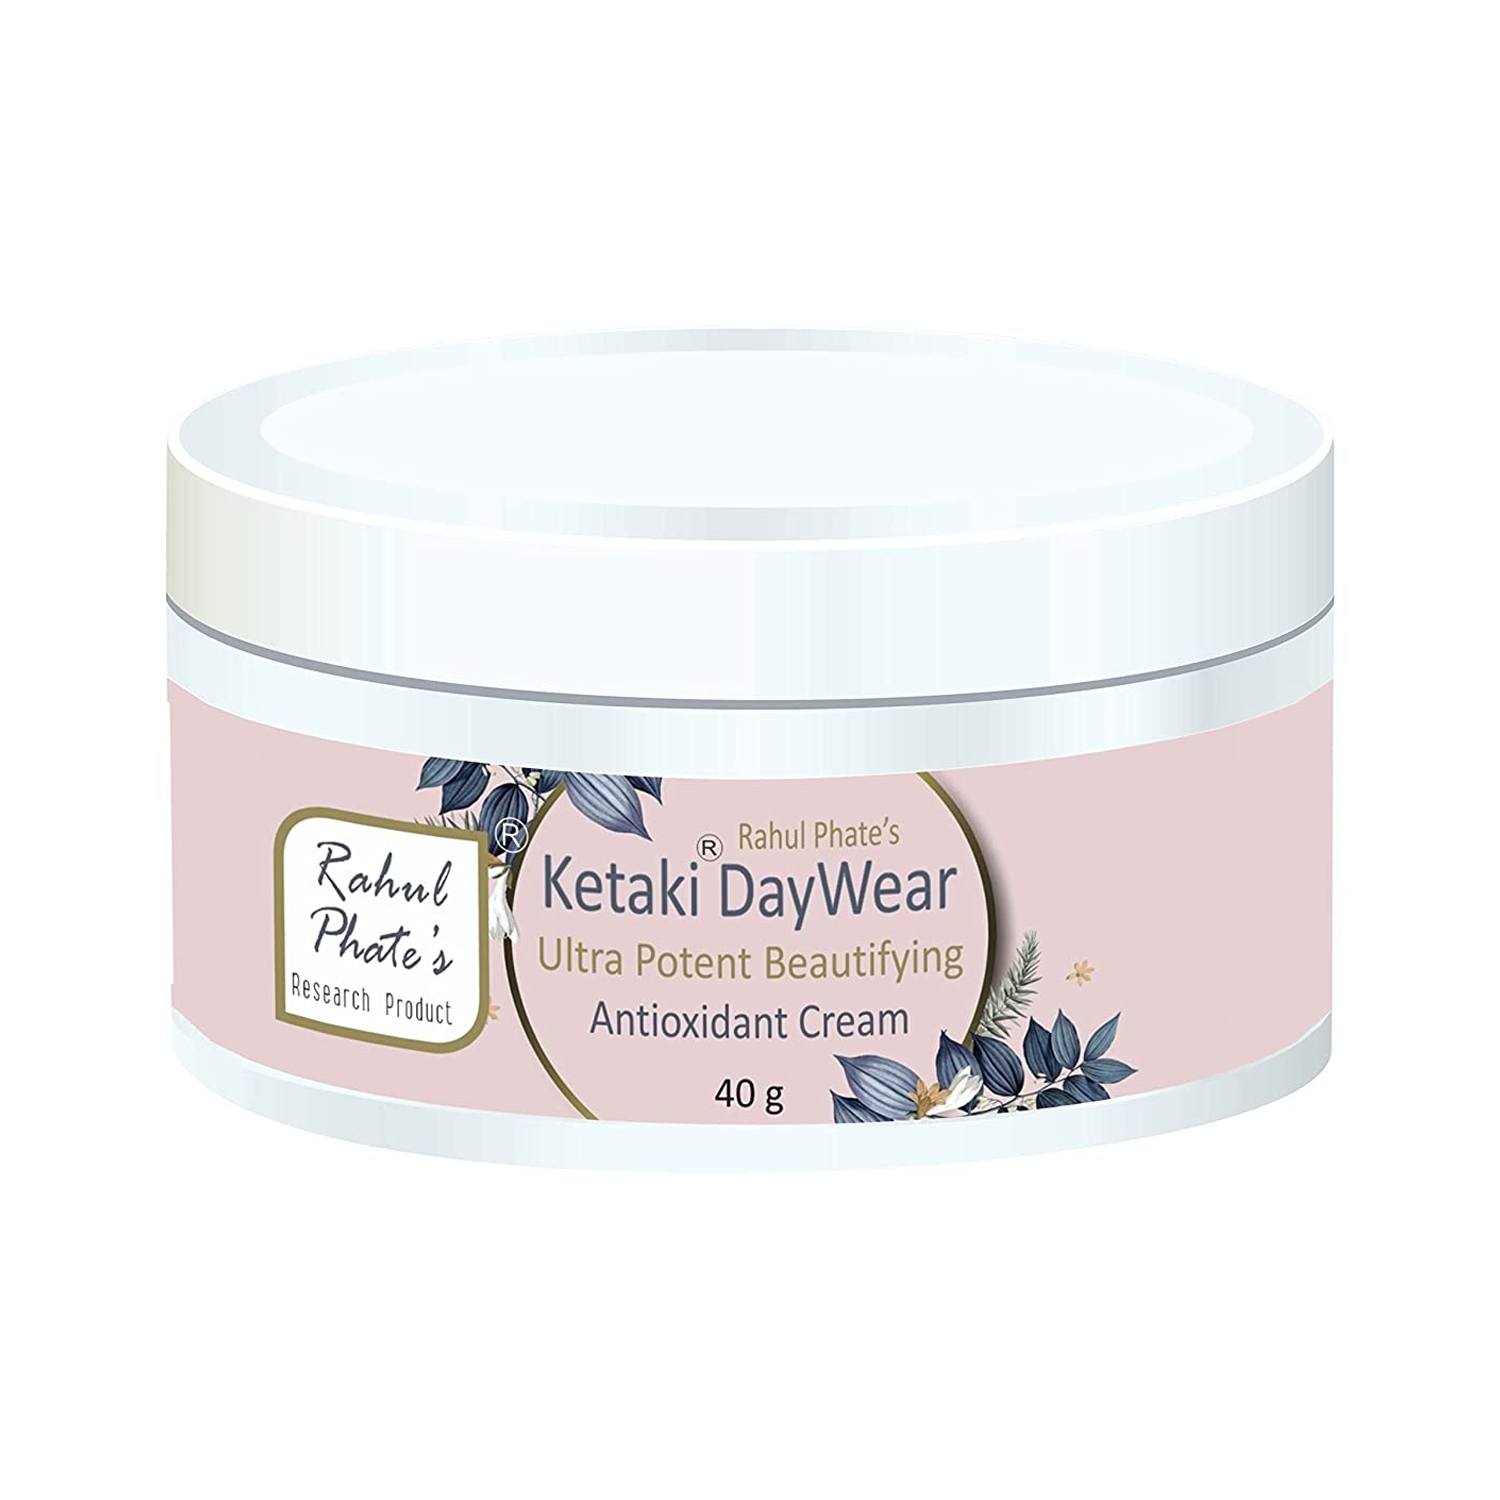 Rahul Phate's Research Product | Rahul Phate's Research Product Ketaki Day Wear Ultra Potent Beautifying Antioxidant Face Cream (40g)